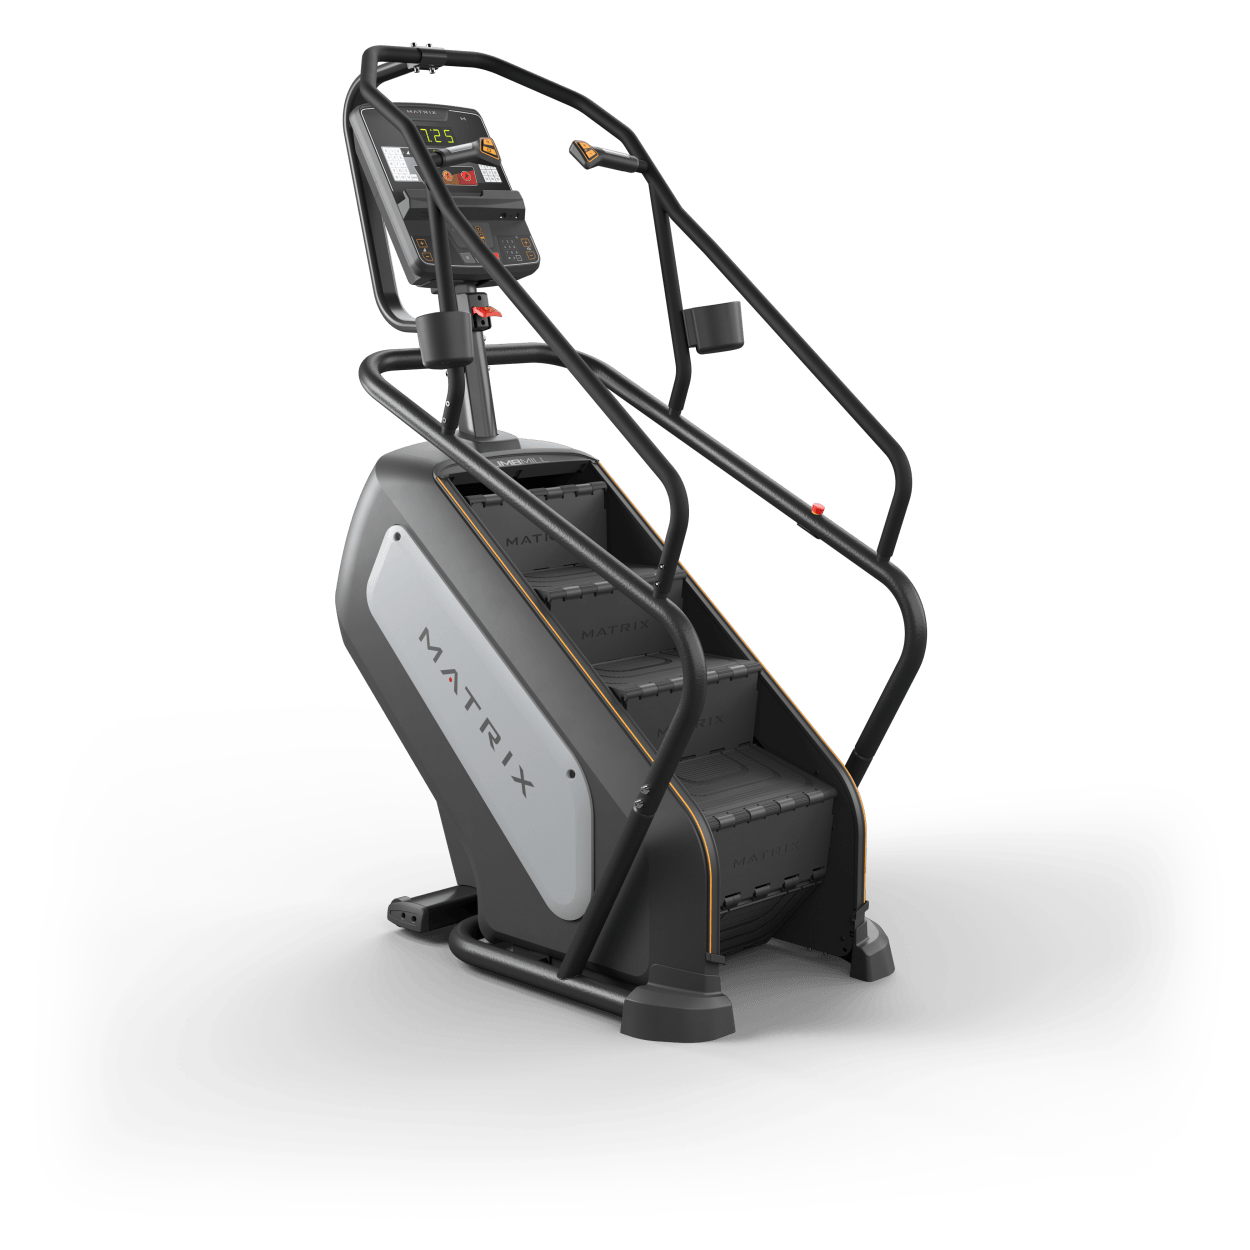 Matrix Fitness Endurance Climbmill Group Training Console full view | Fitness Experience